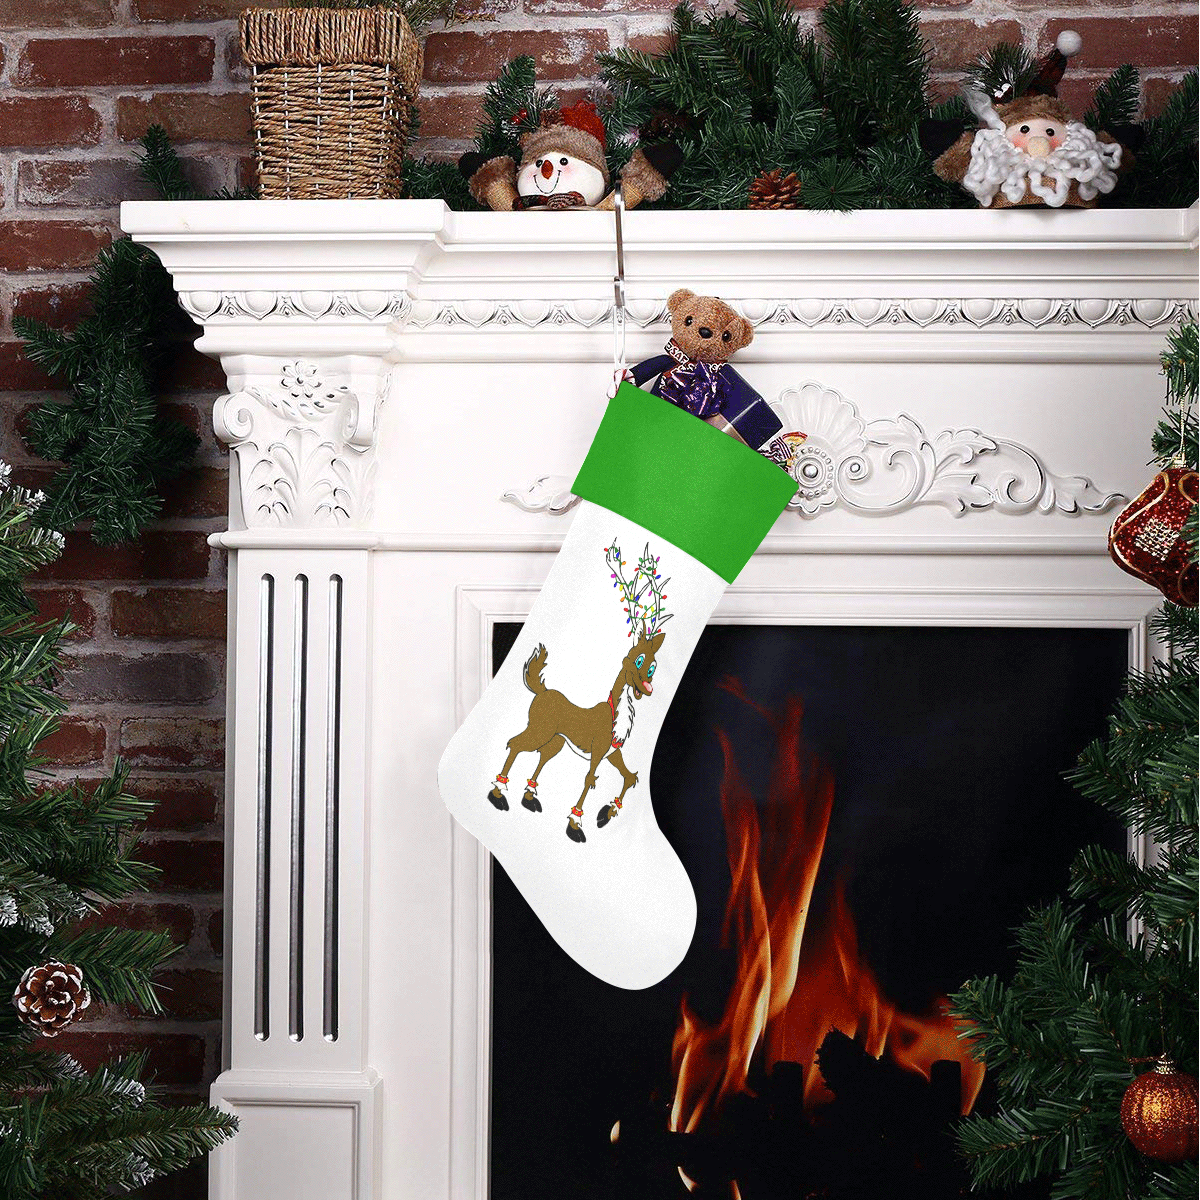 Rudy Reindeer With Lights White/Green Christmas Stocking